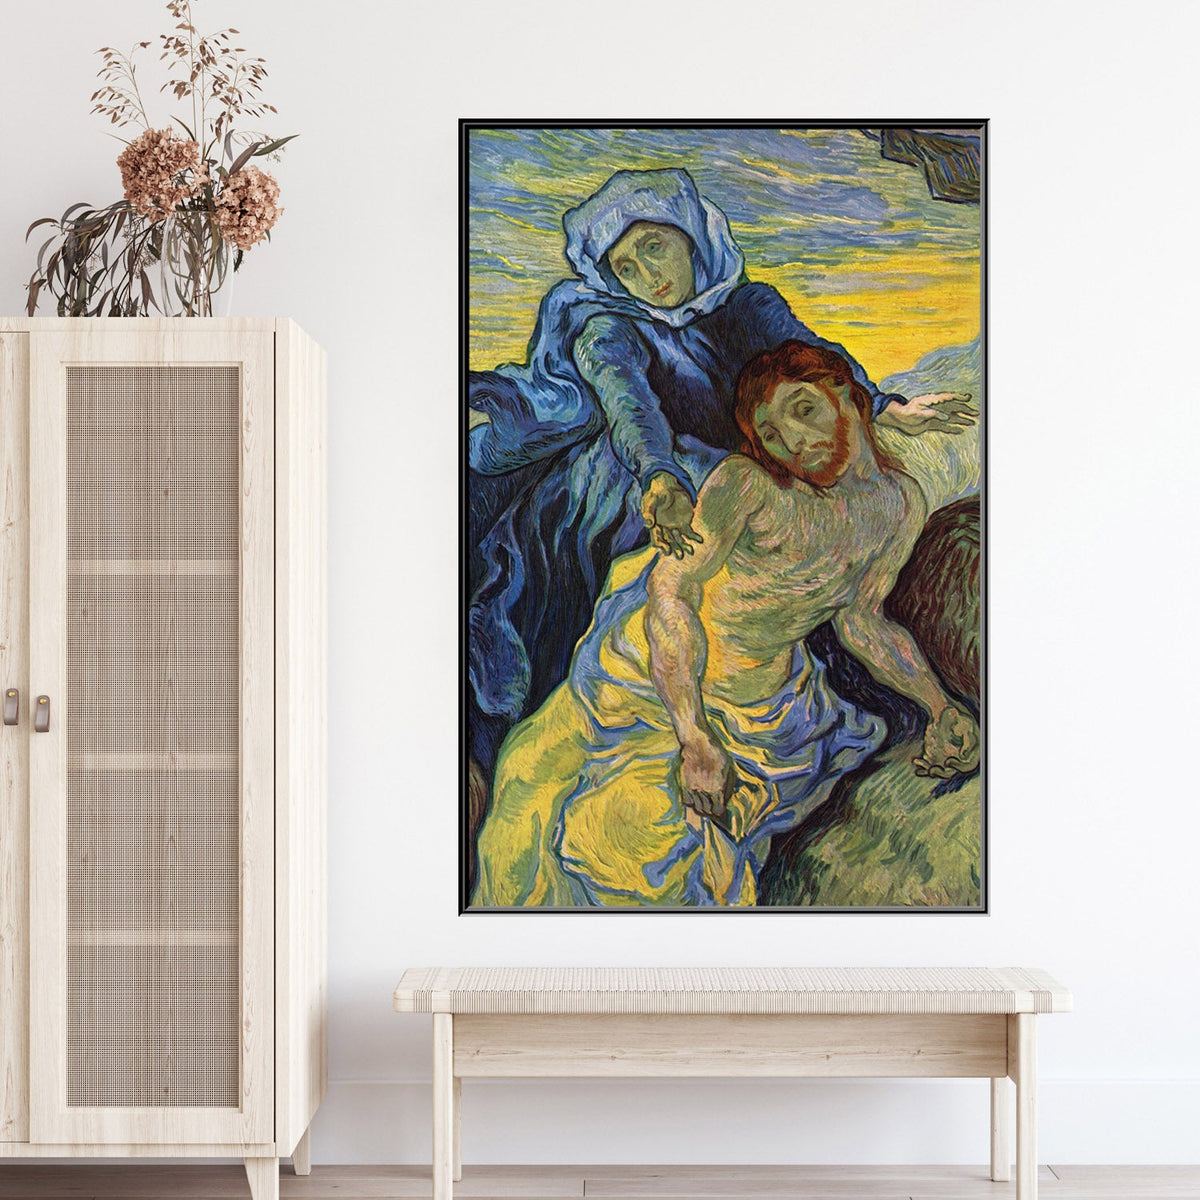 https://cdn.shopify.com/s/files/1/0387/9986/8044/products/ThePietabyVanGoghFloatingFrame-2.jpg